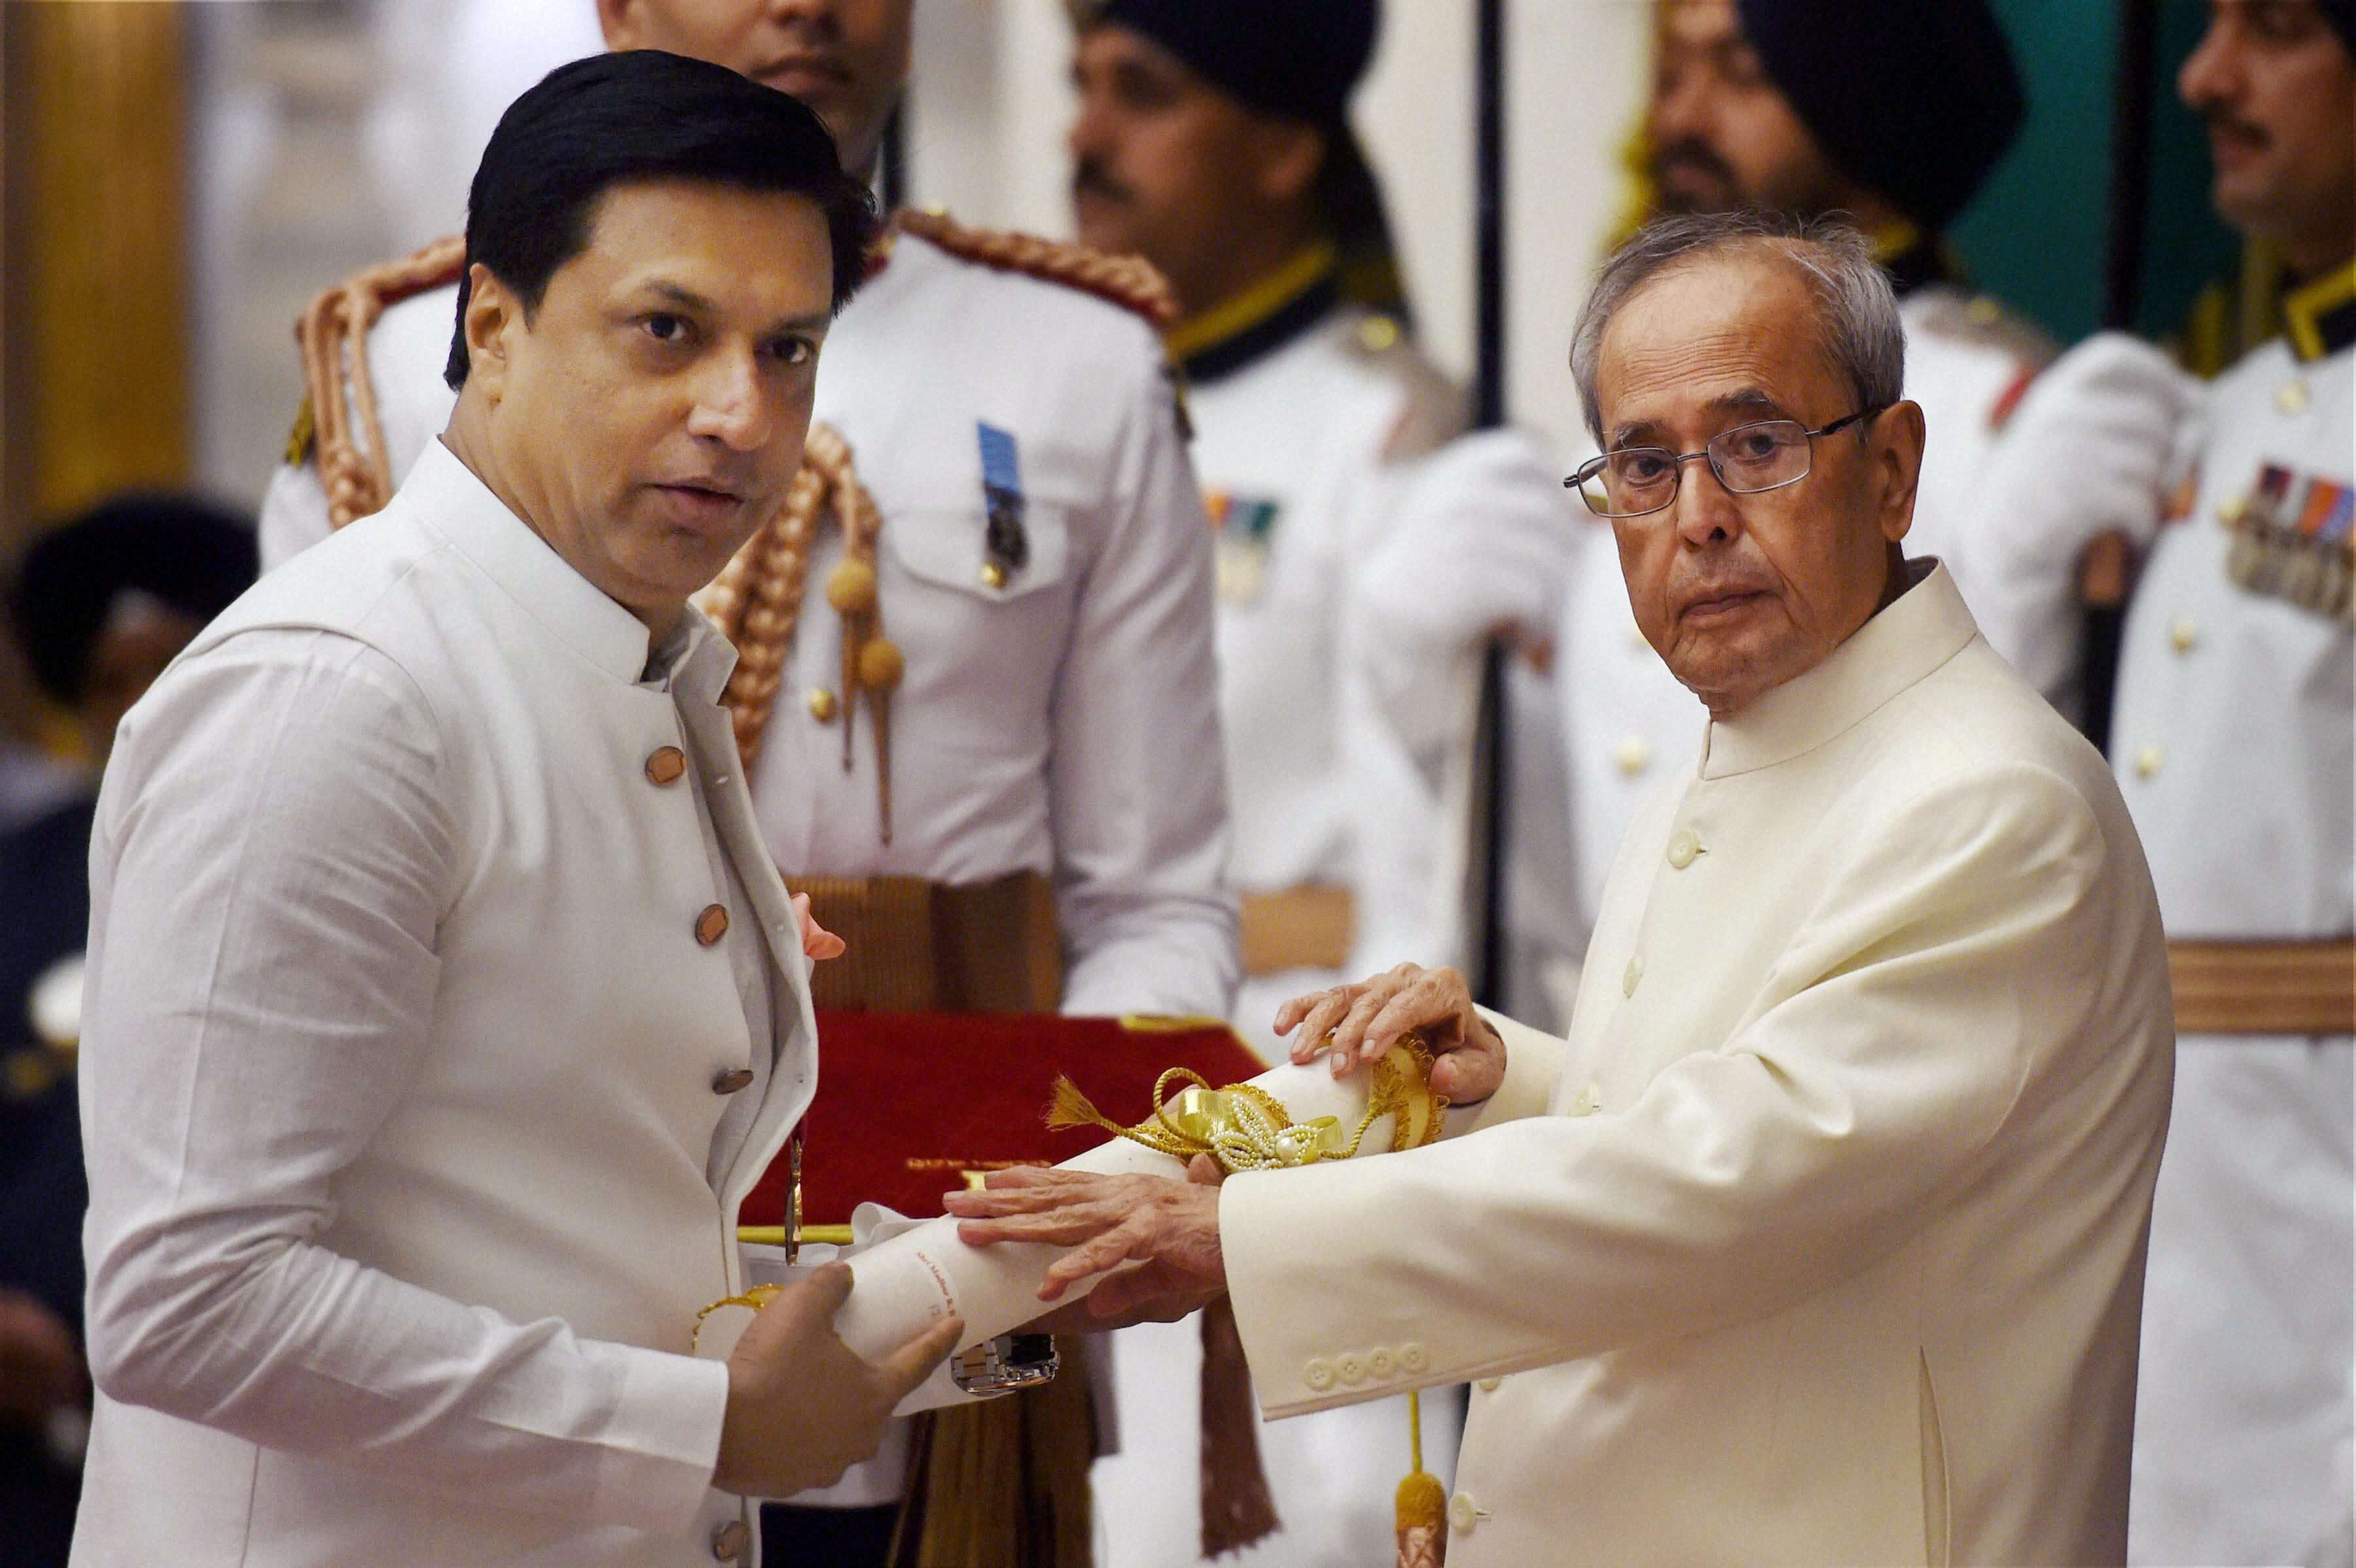 Now Any Indian Can Recommend An Acheiver For Padma Awards